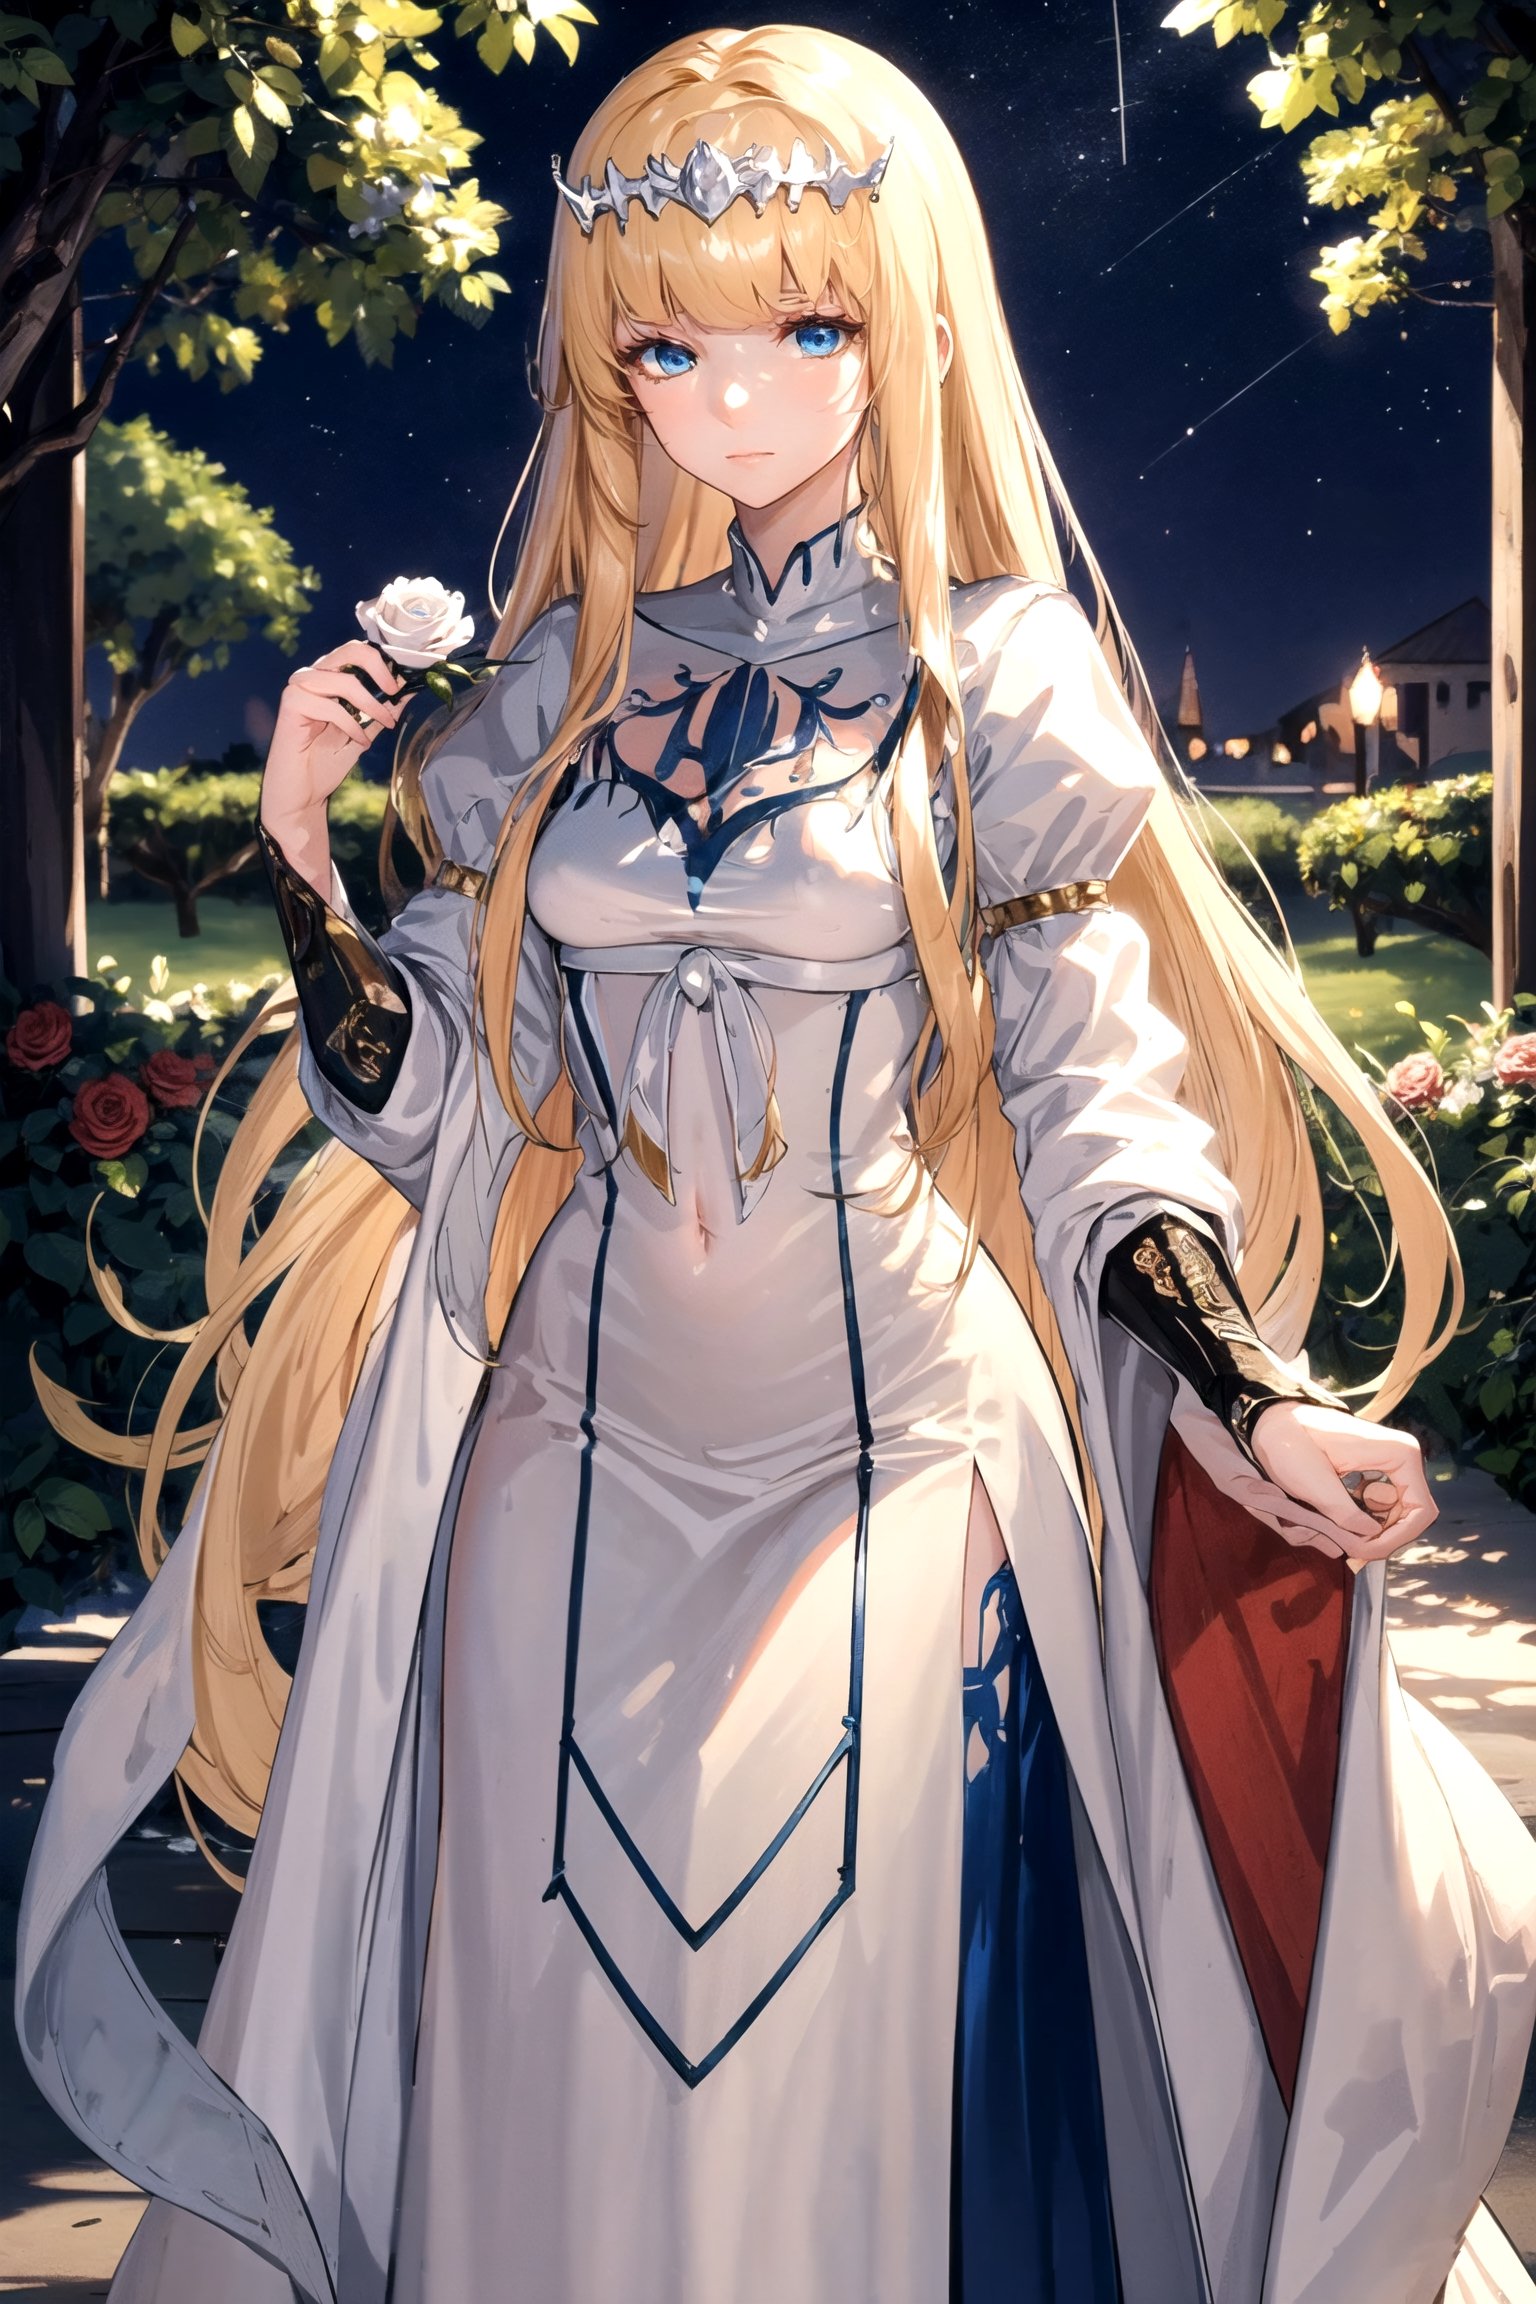 //Quality, masterpiece, best quality
,//Character,
1girl, solo
,//Fashion,
,//Background,
night, black Rose garden
,//Others,
Calca, Calca Bessarez, blonde hair, extremely long hair, very long hair, white tiara, white dress, blue eyes, medium chest